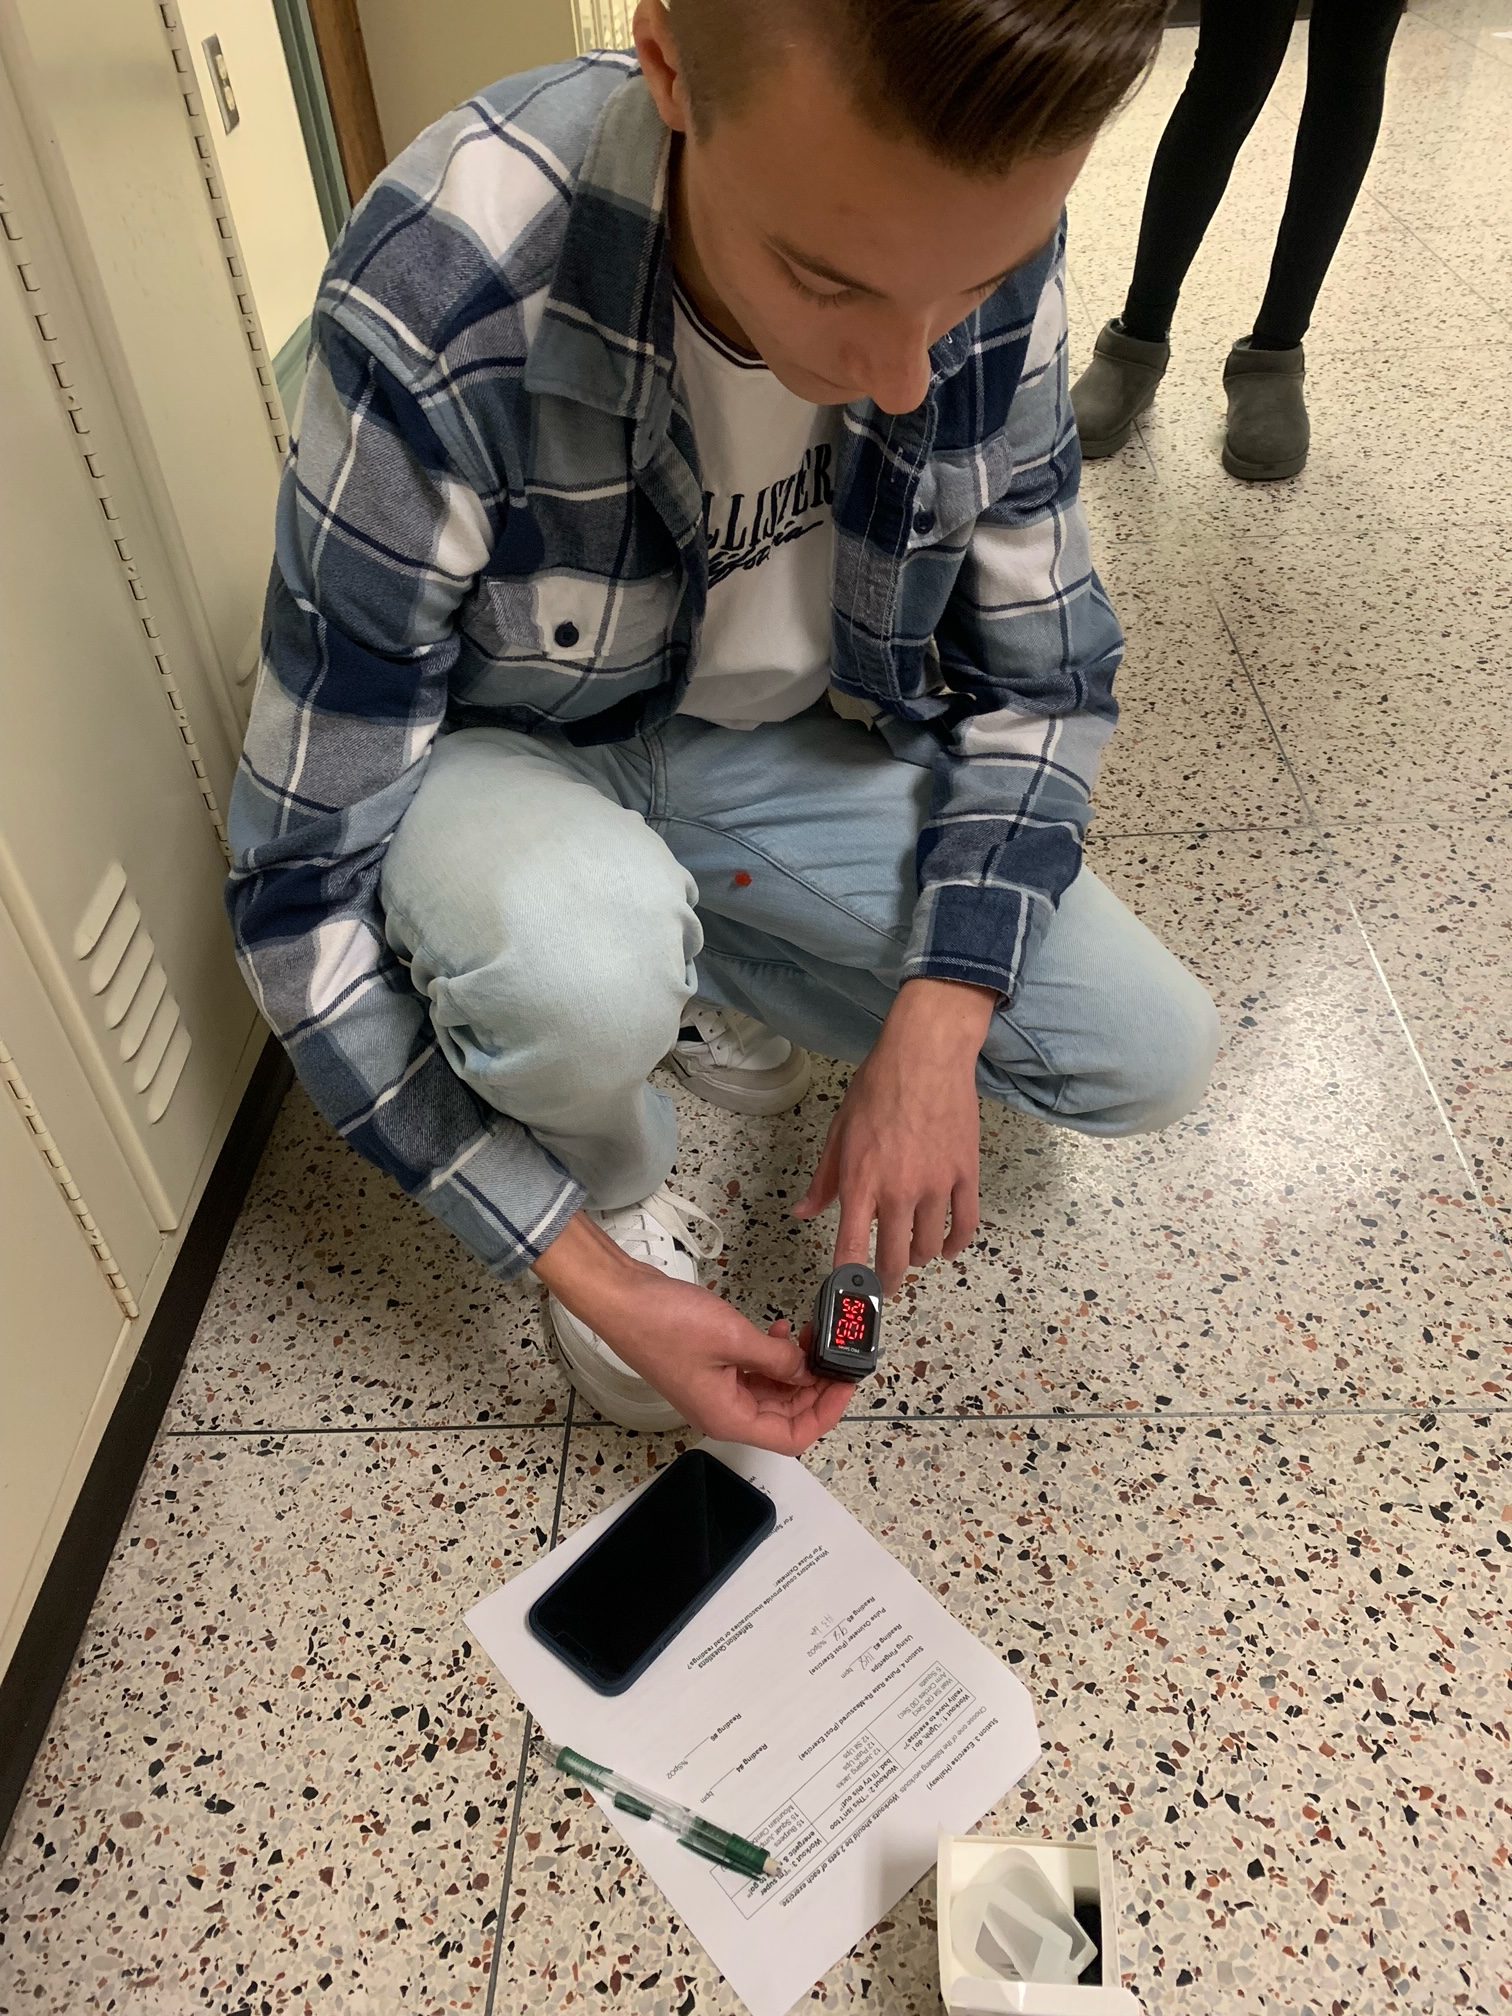 High school students in the Health Sciences for Medical Careers course practice career skills with oximeters,  sphygmomanometers, and stethoscopes.